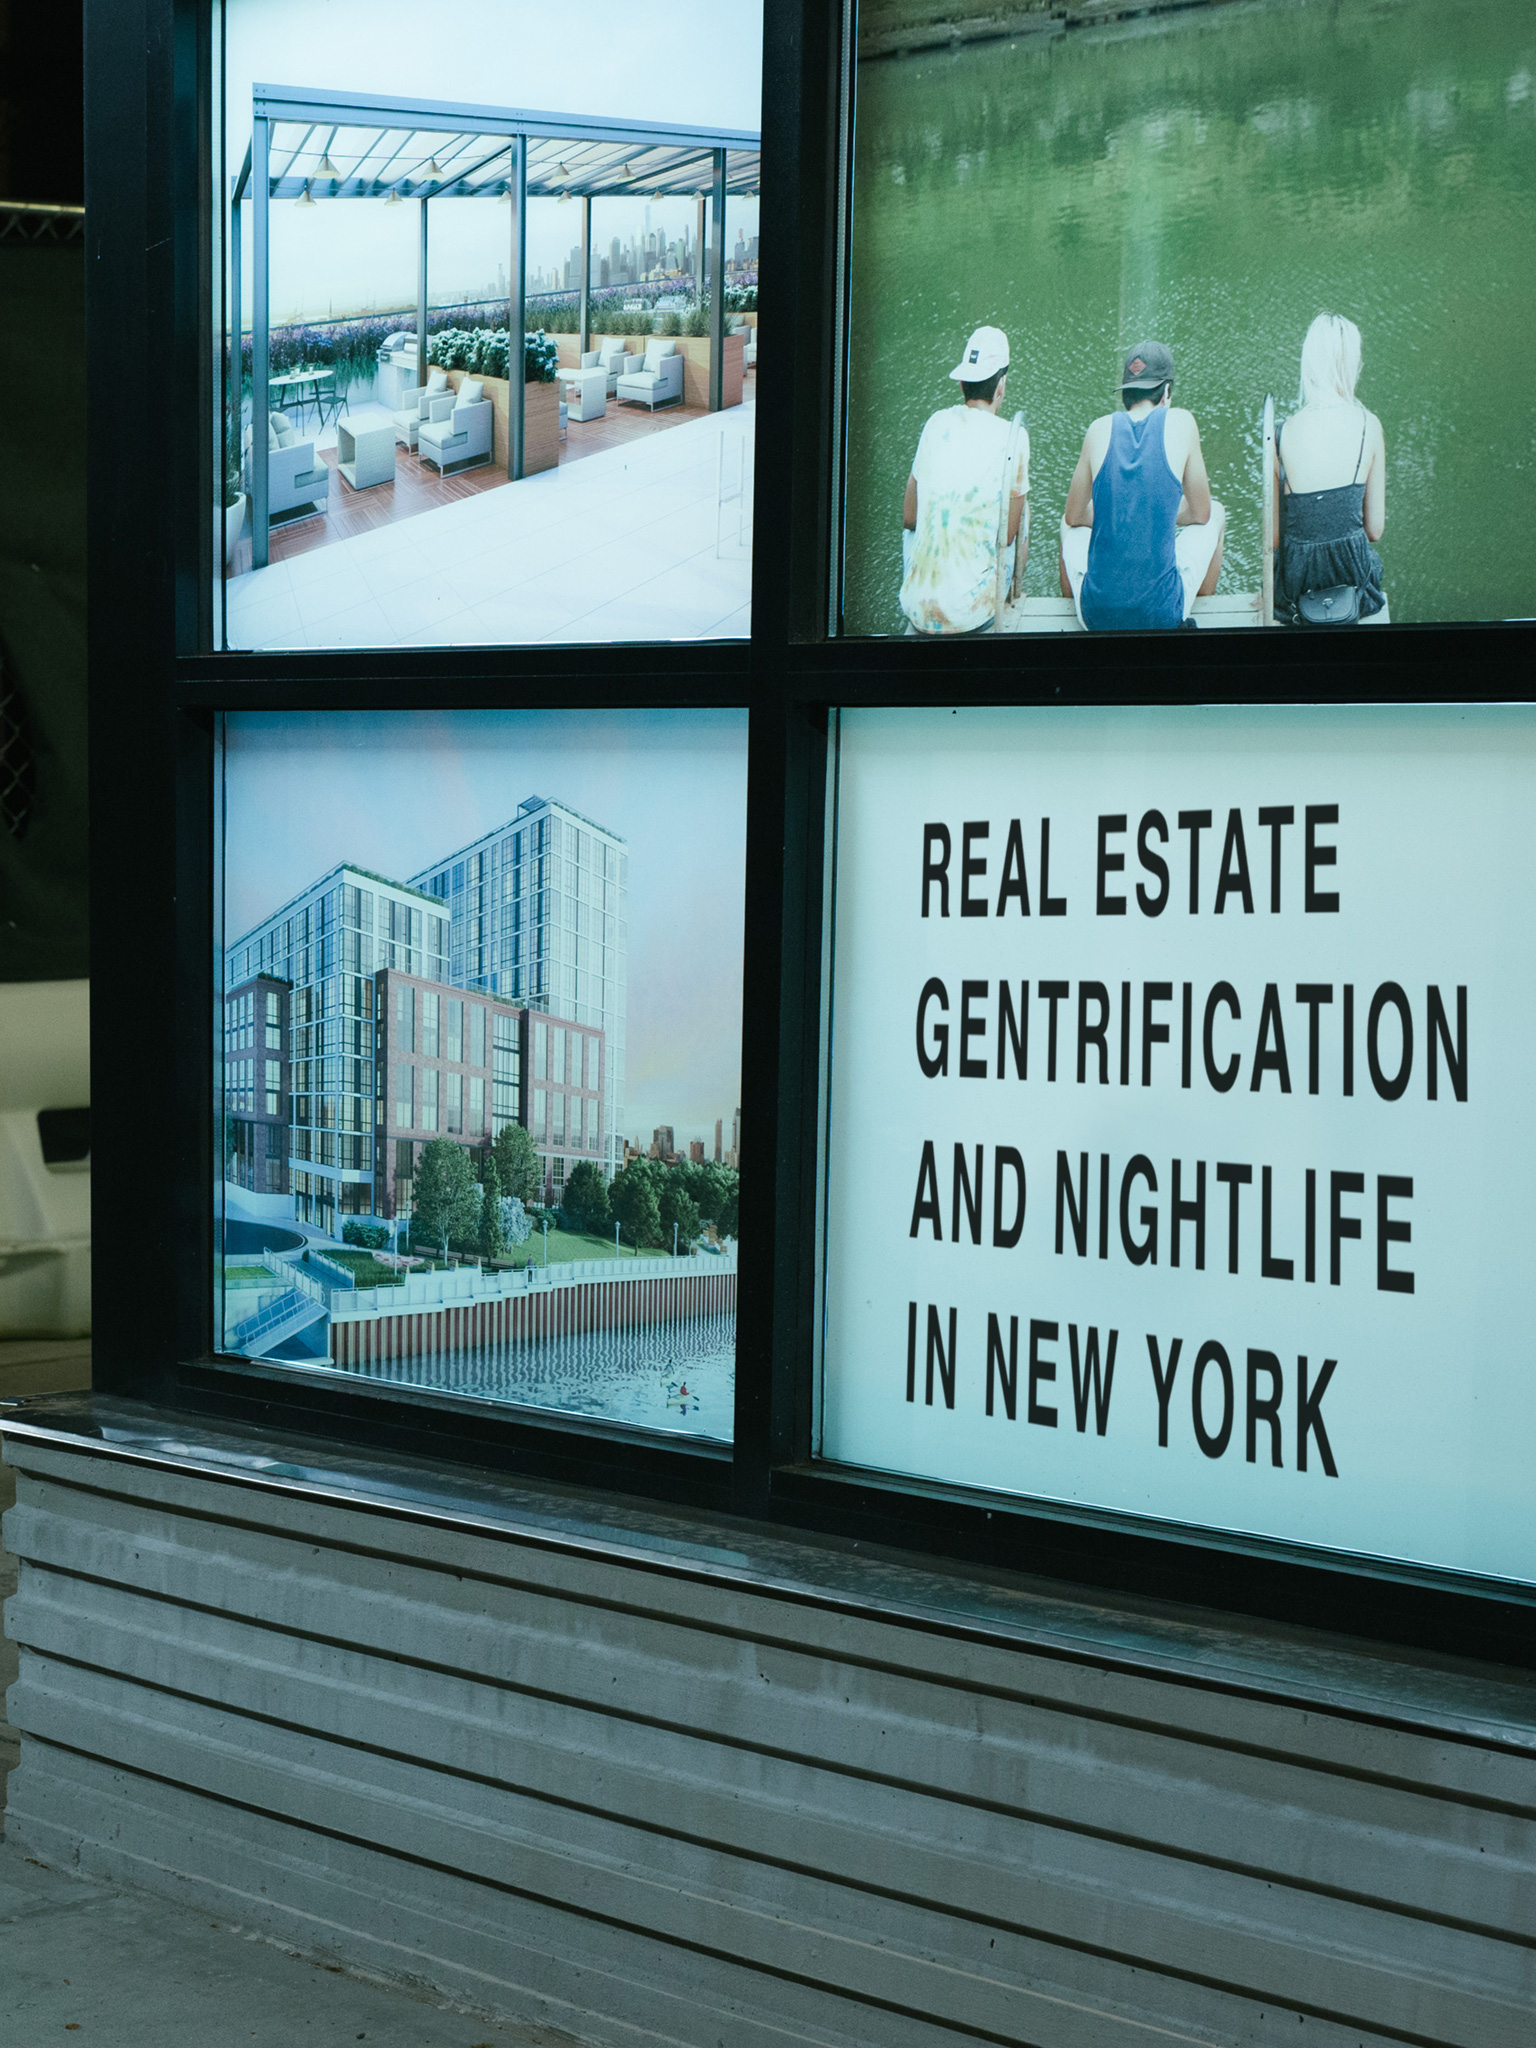 Real estate, gentrification and nightlife in New York  